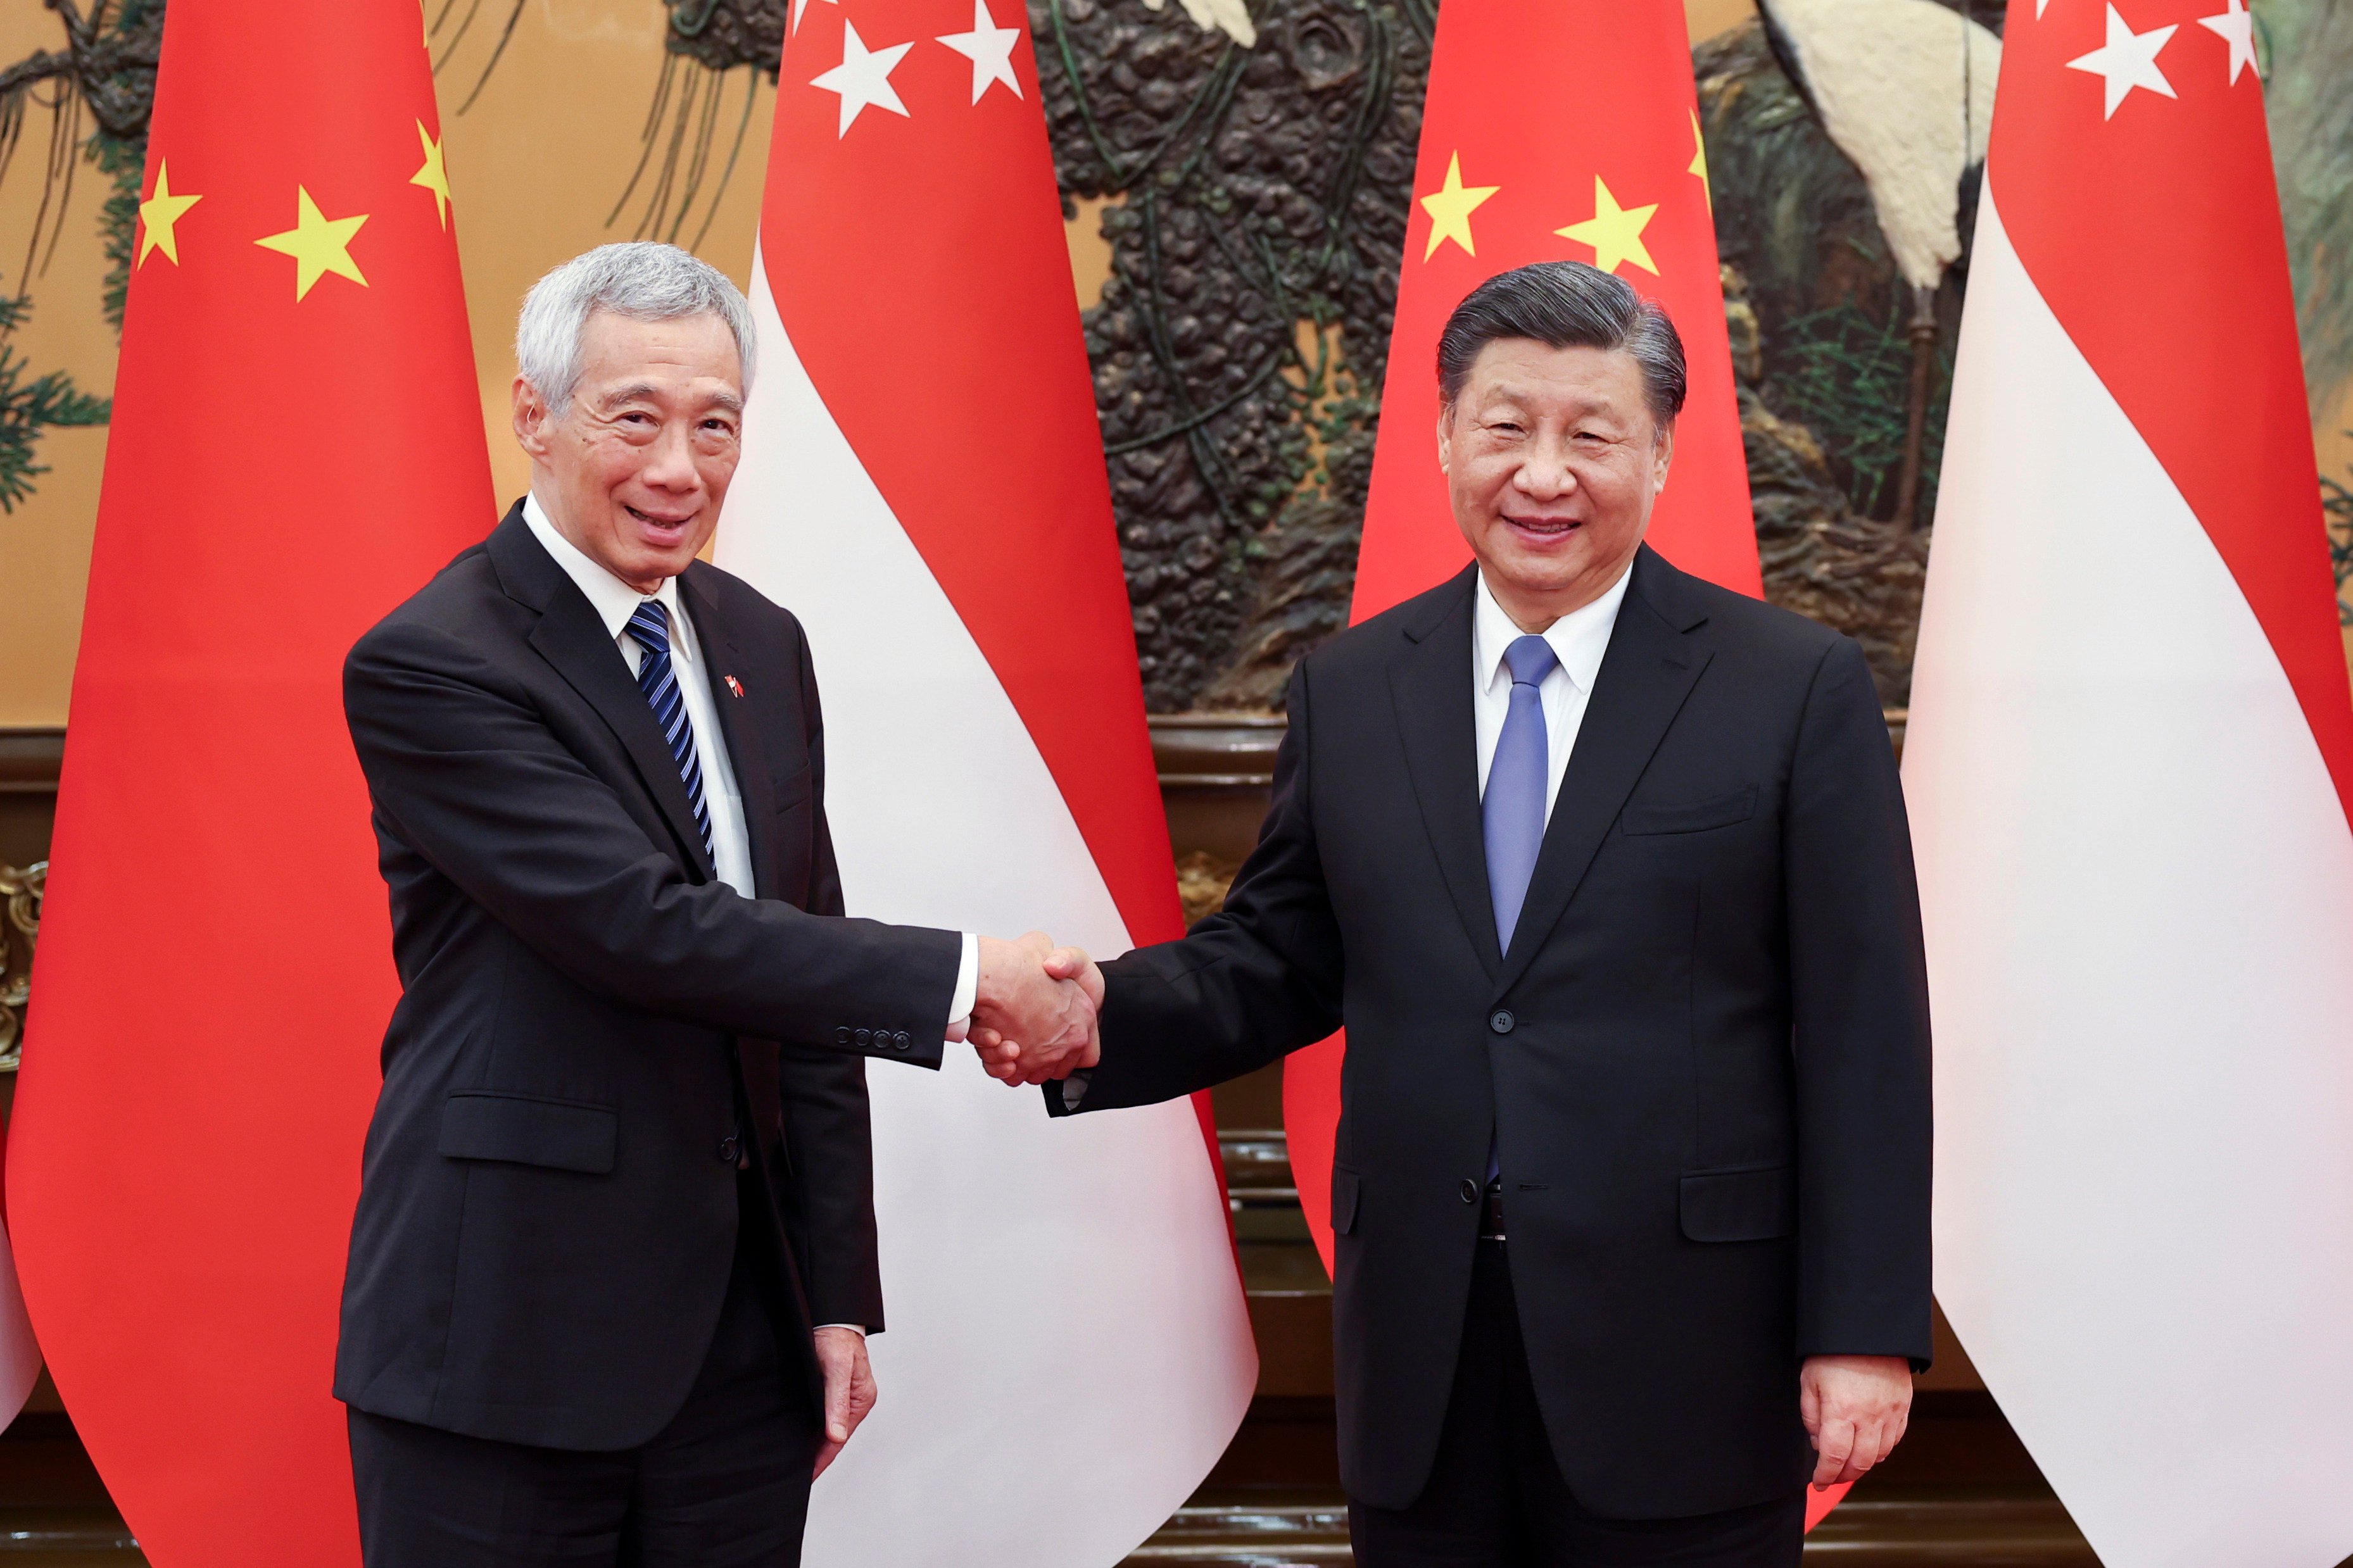 Chinese President Xi Jinping (right) meets Singapore’s Prime Minister Lee Hsien Loong in Beijing in March 31. Photo: Xinhua via AP